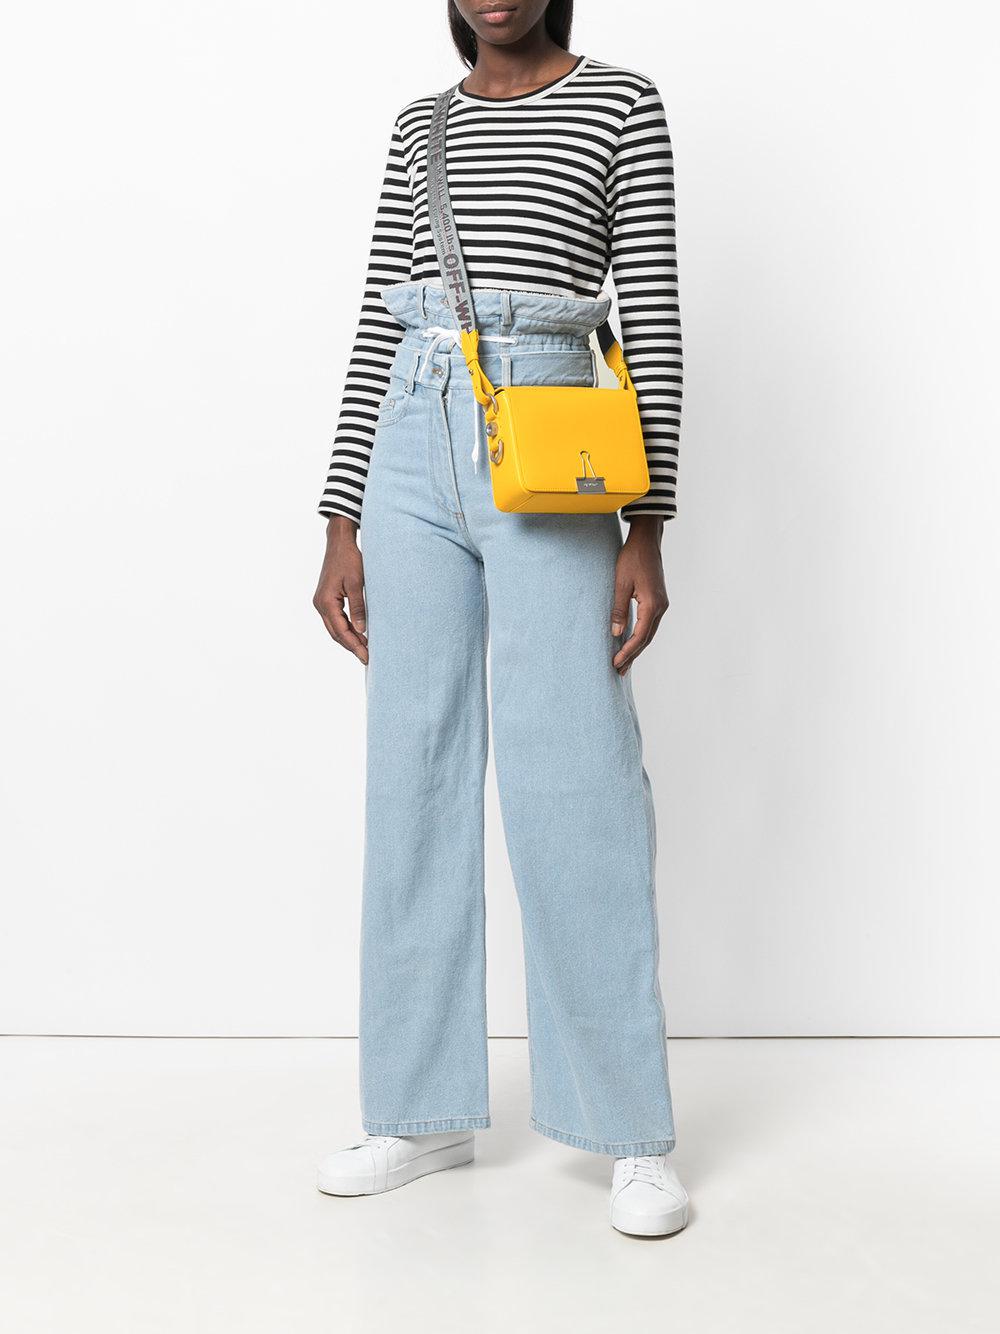 Lyst - Off-White C/O Virgil Abloh Sculpture Binder Clip Bag in Yellow